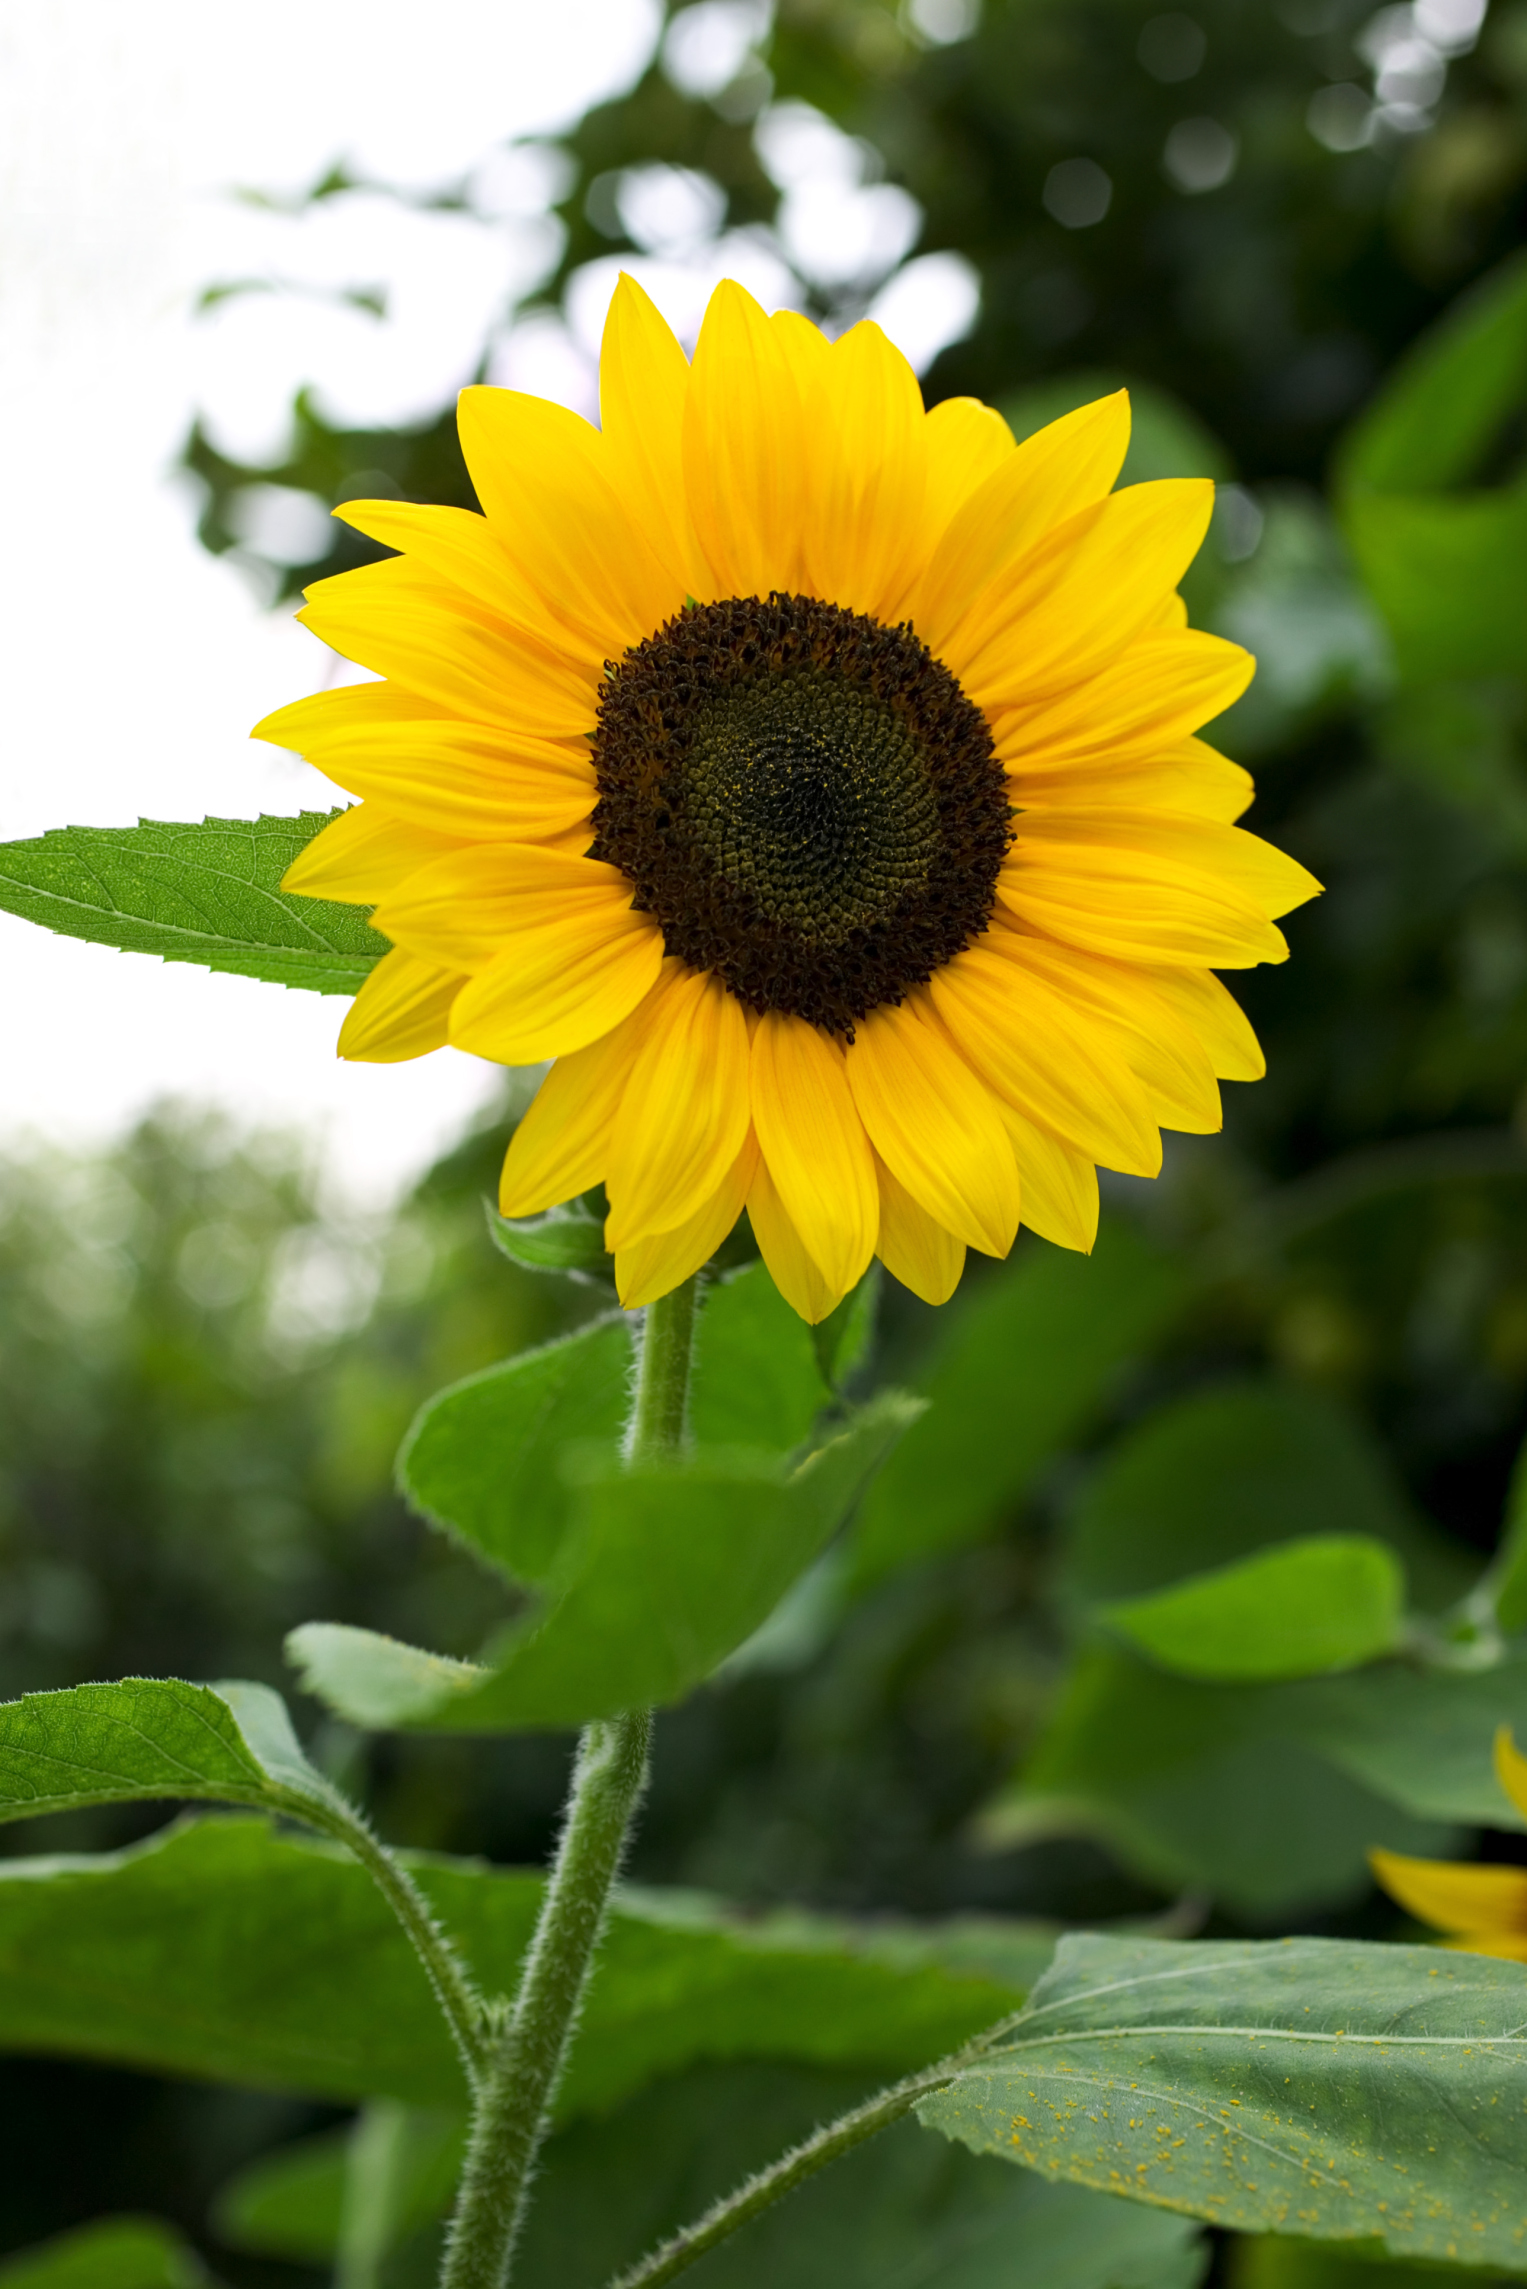 How Long After Sowing Seeds Will a Sunflower Bloom? | Home Guides ...